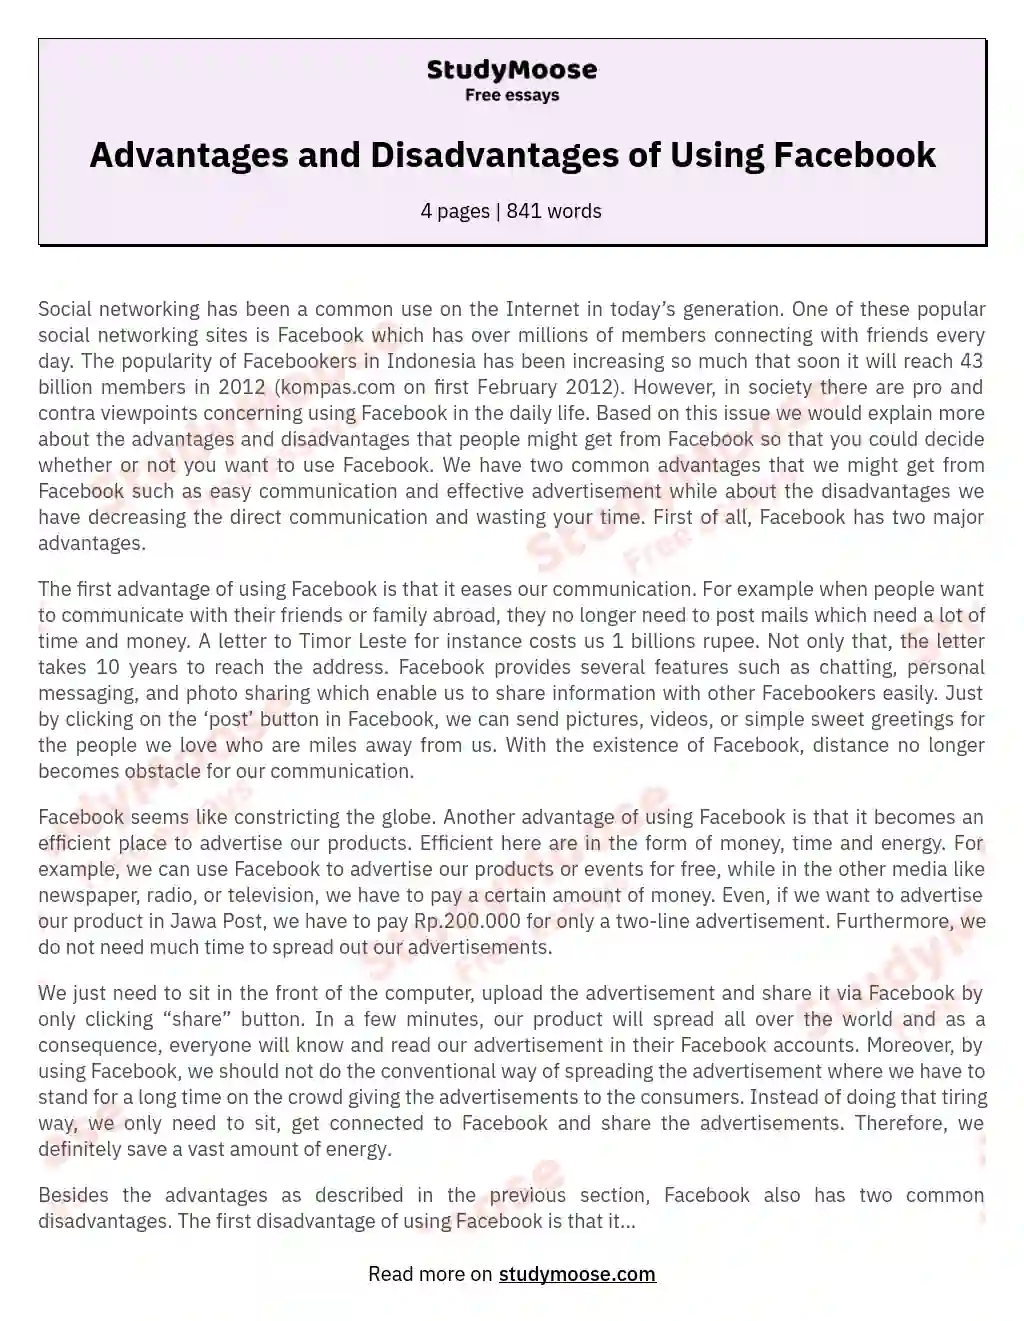 Advantages and Disadvantages of Using Facebook essay